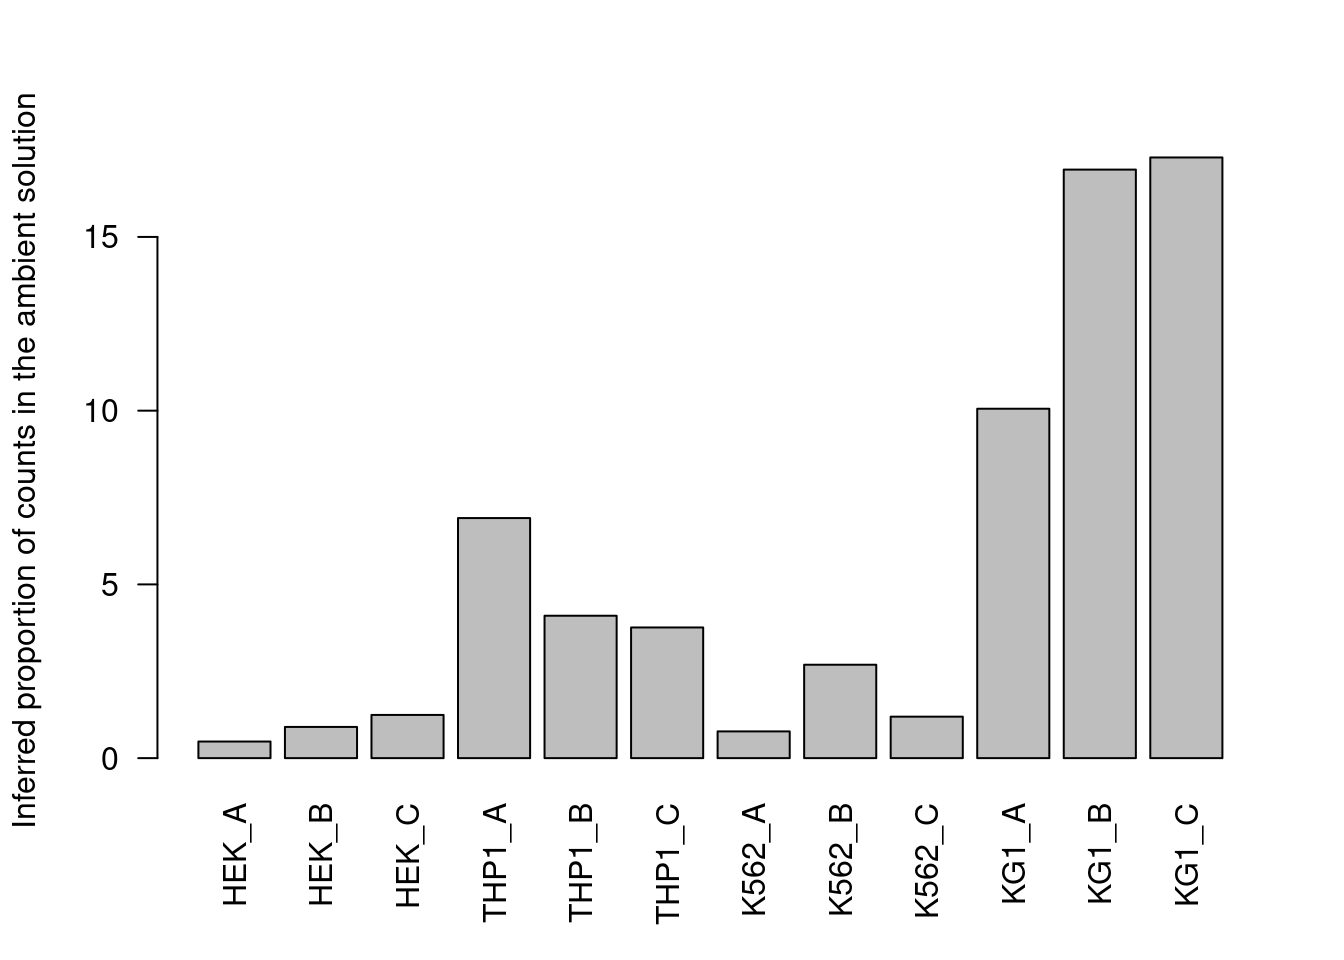 Proportion of each HTO in the ambient solution for the cell line mixture data, estimated from the HTO counts of cell-containing droplets.